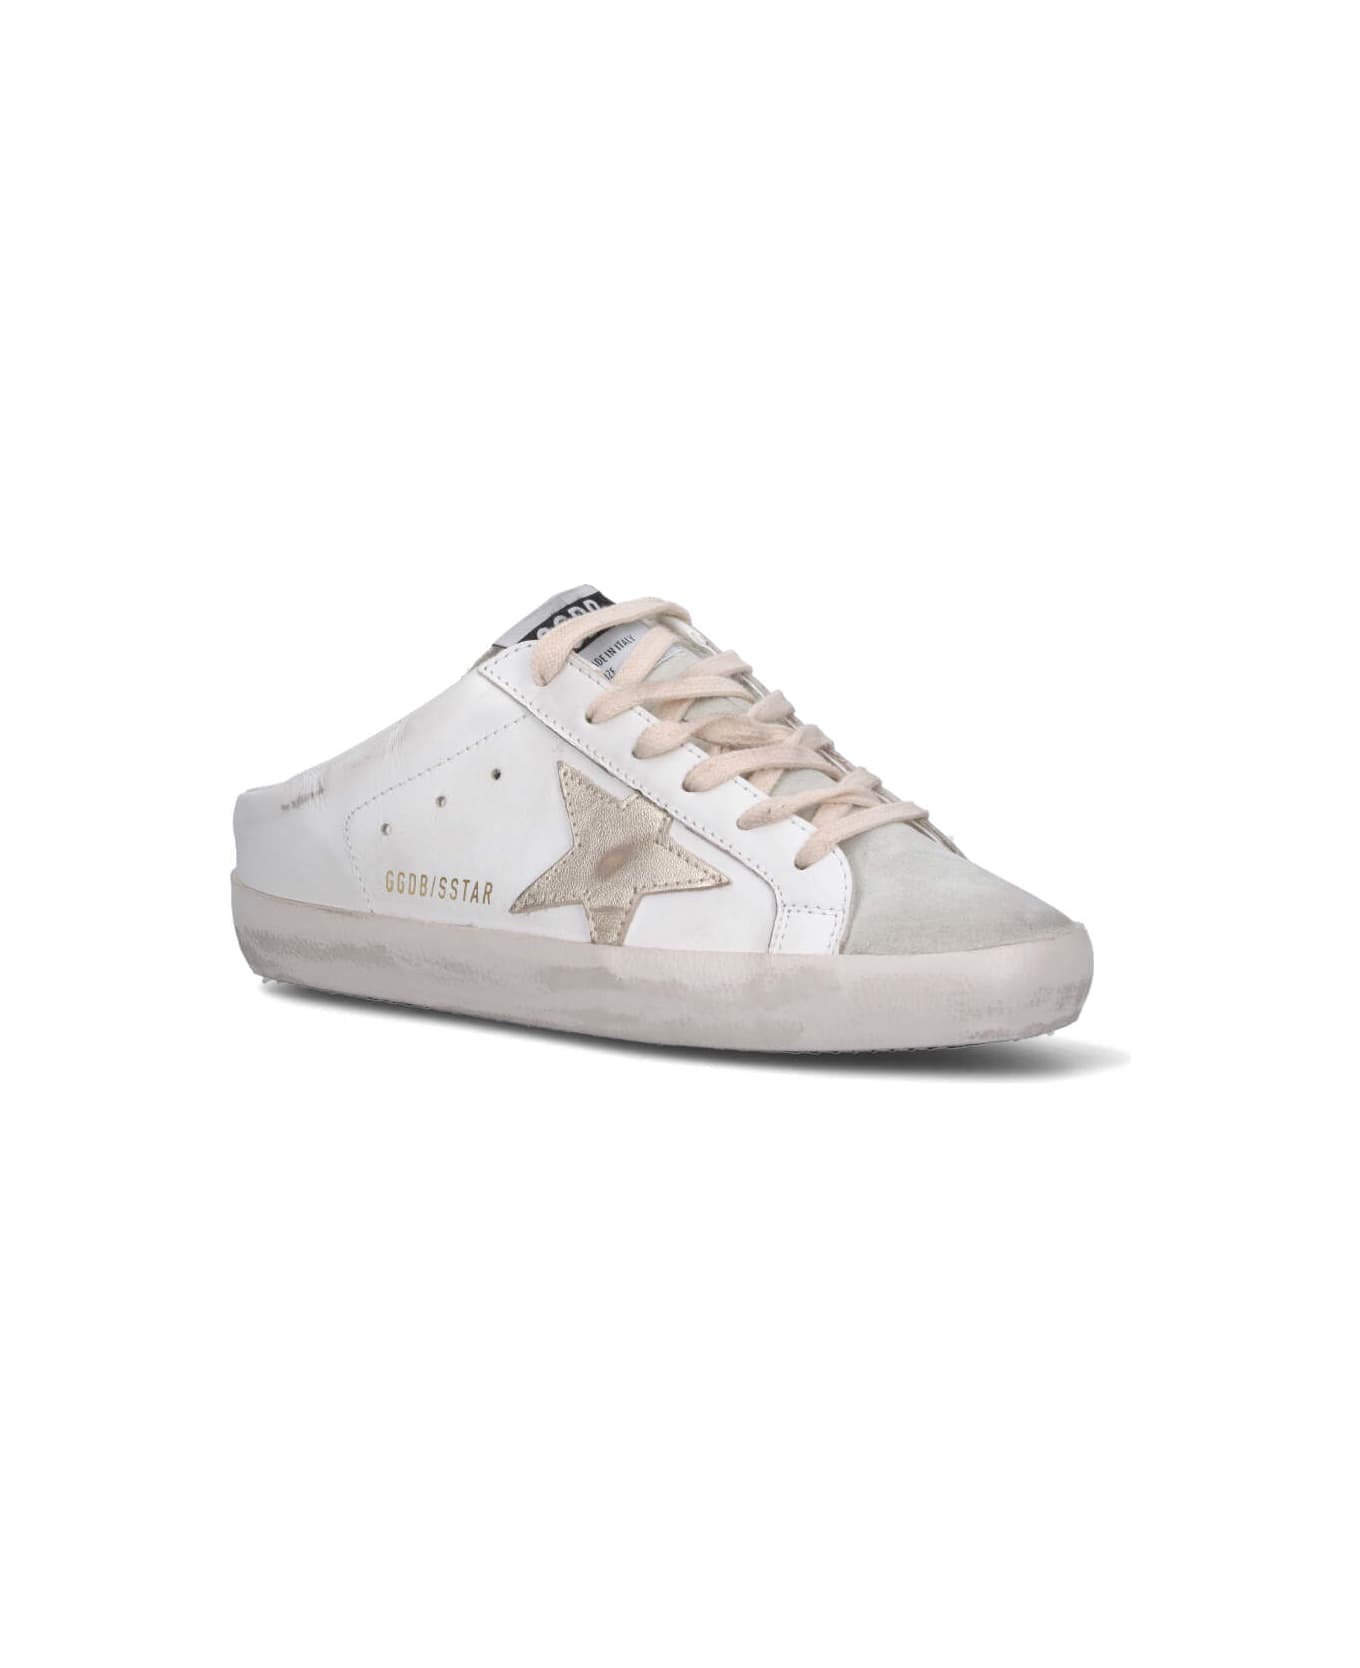 Golden Goose Superstar Sneakers In White Suede And Leather - White